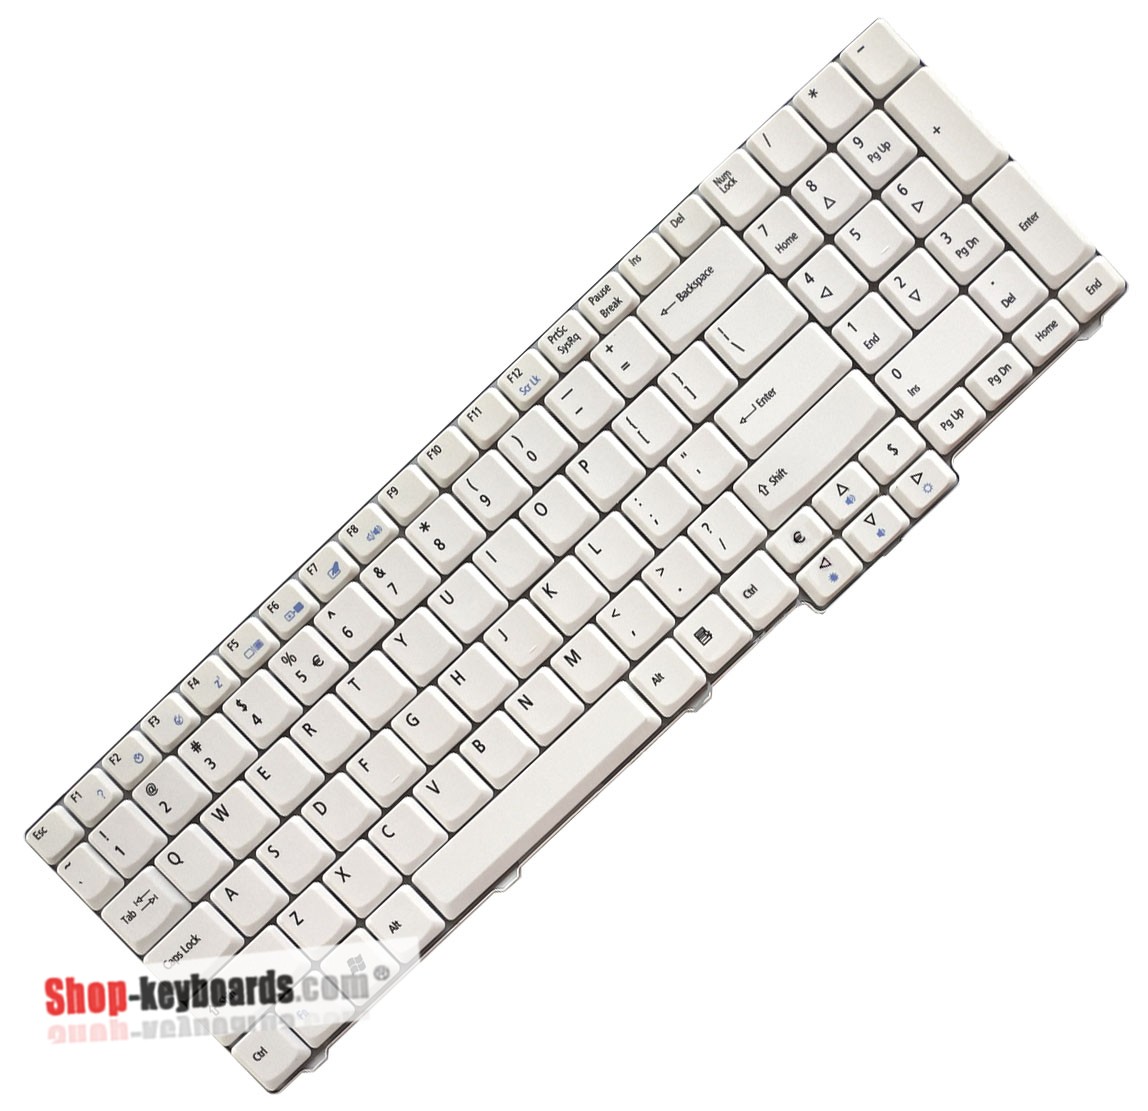 Acer Aspire 9300-5415 Keyboard replacement